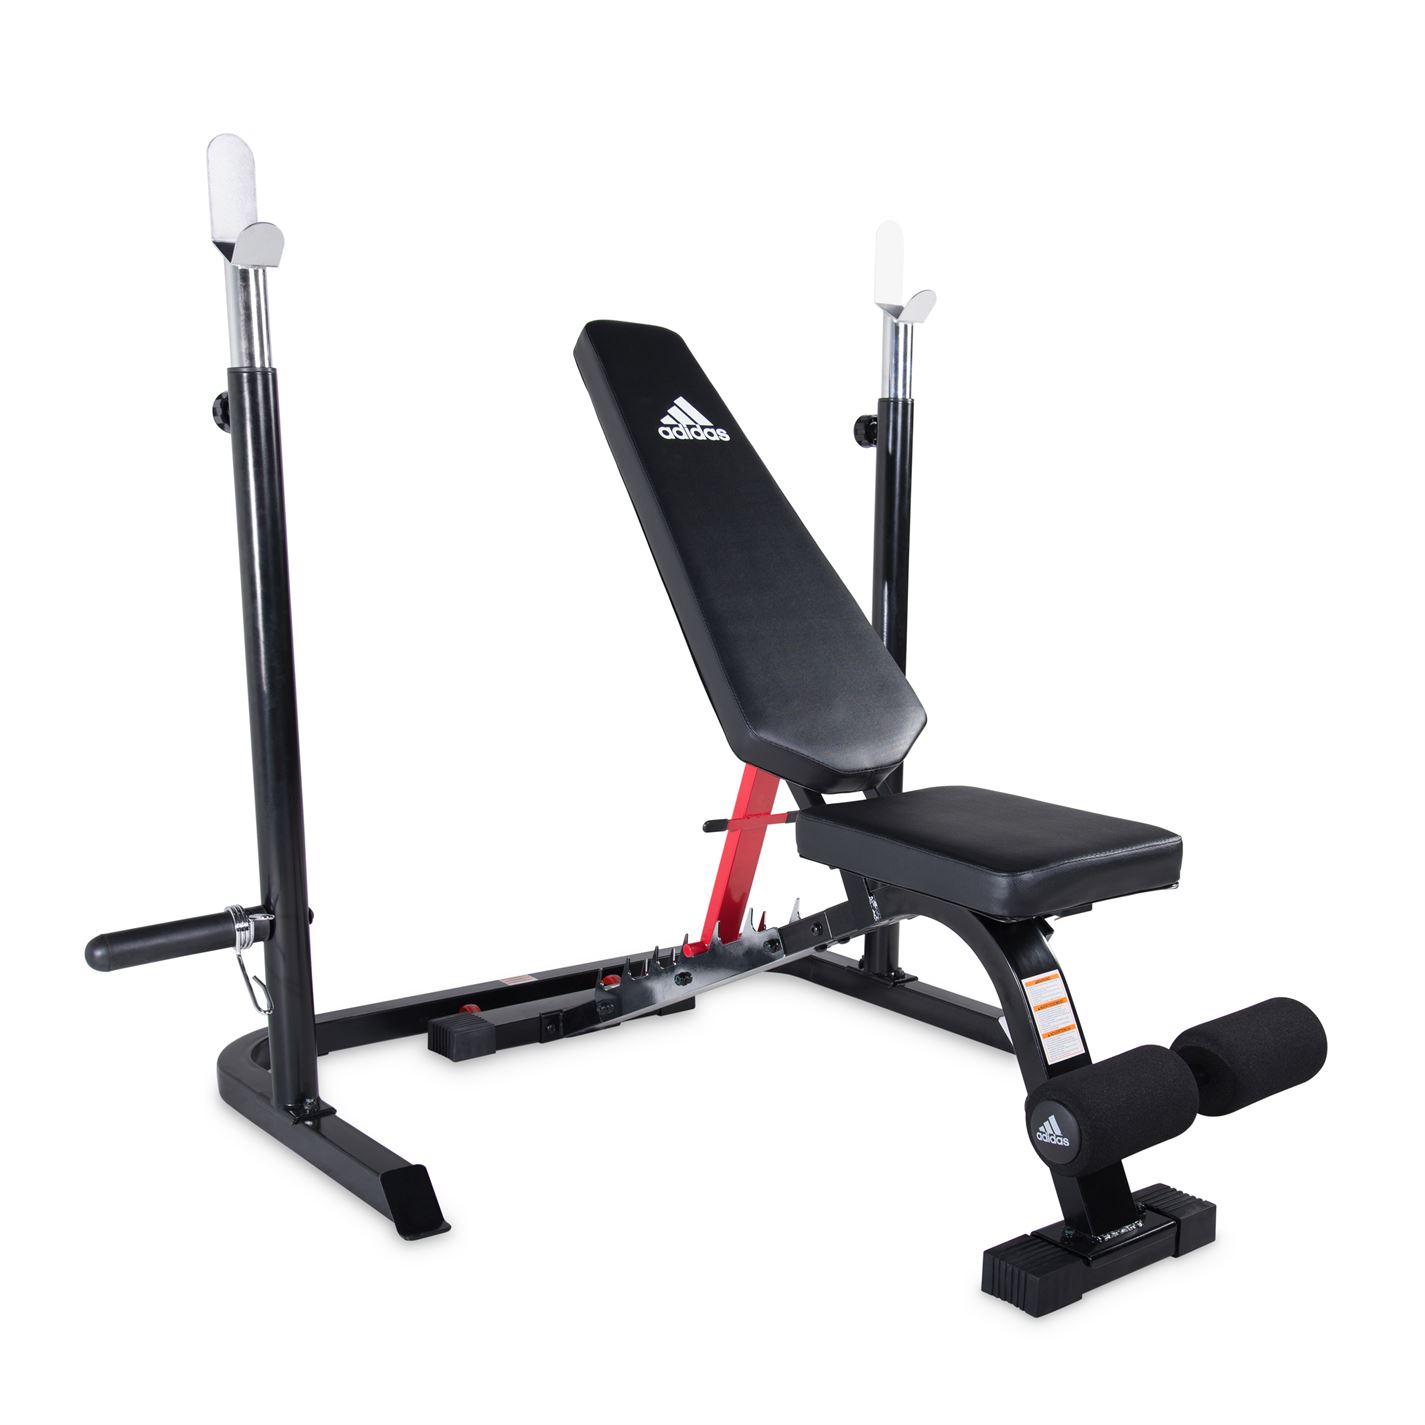 Adidas Sports Utility Bench and Squat Rack